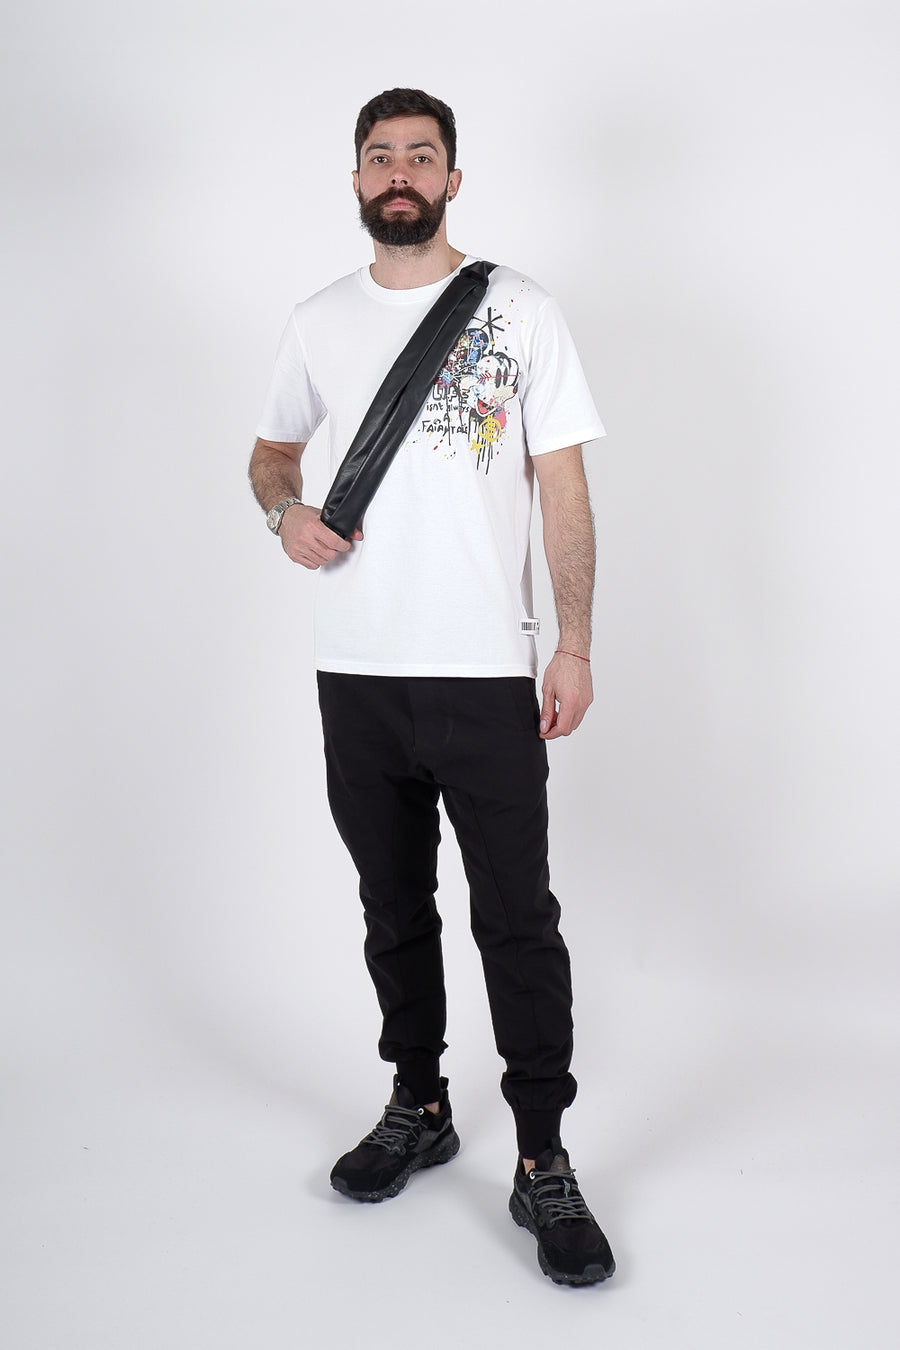 Buy the ABE Mickey T-Shirt in White at Intro. Spend £50 for free UK delivery. Official stockists. We ship worldwide.